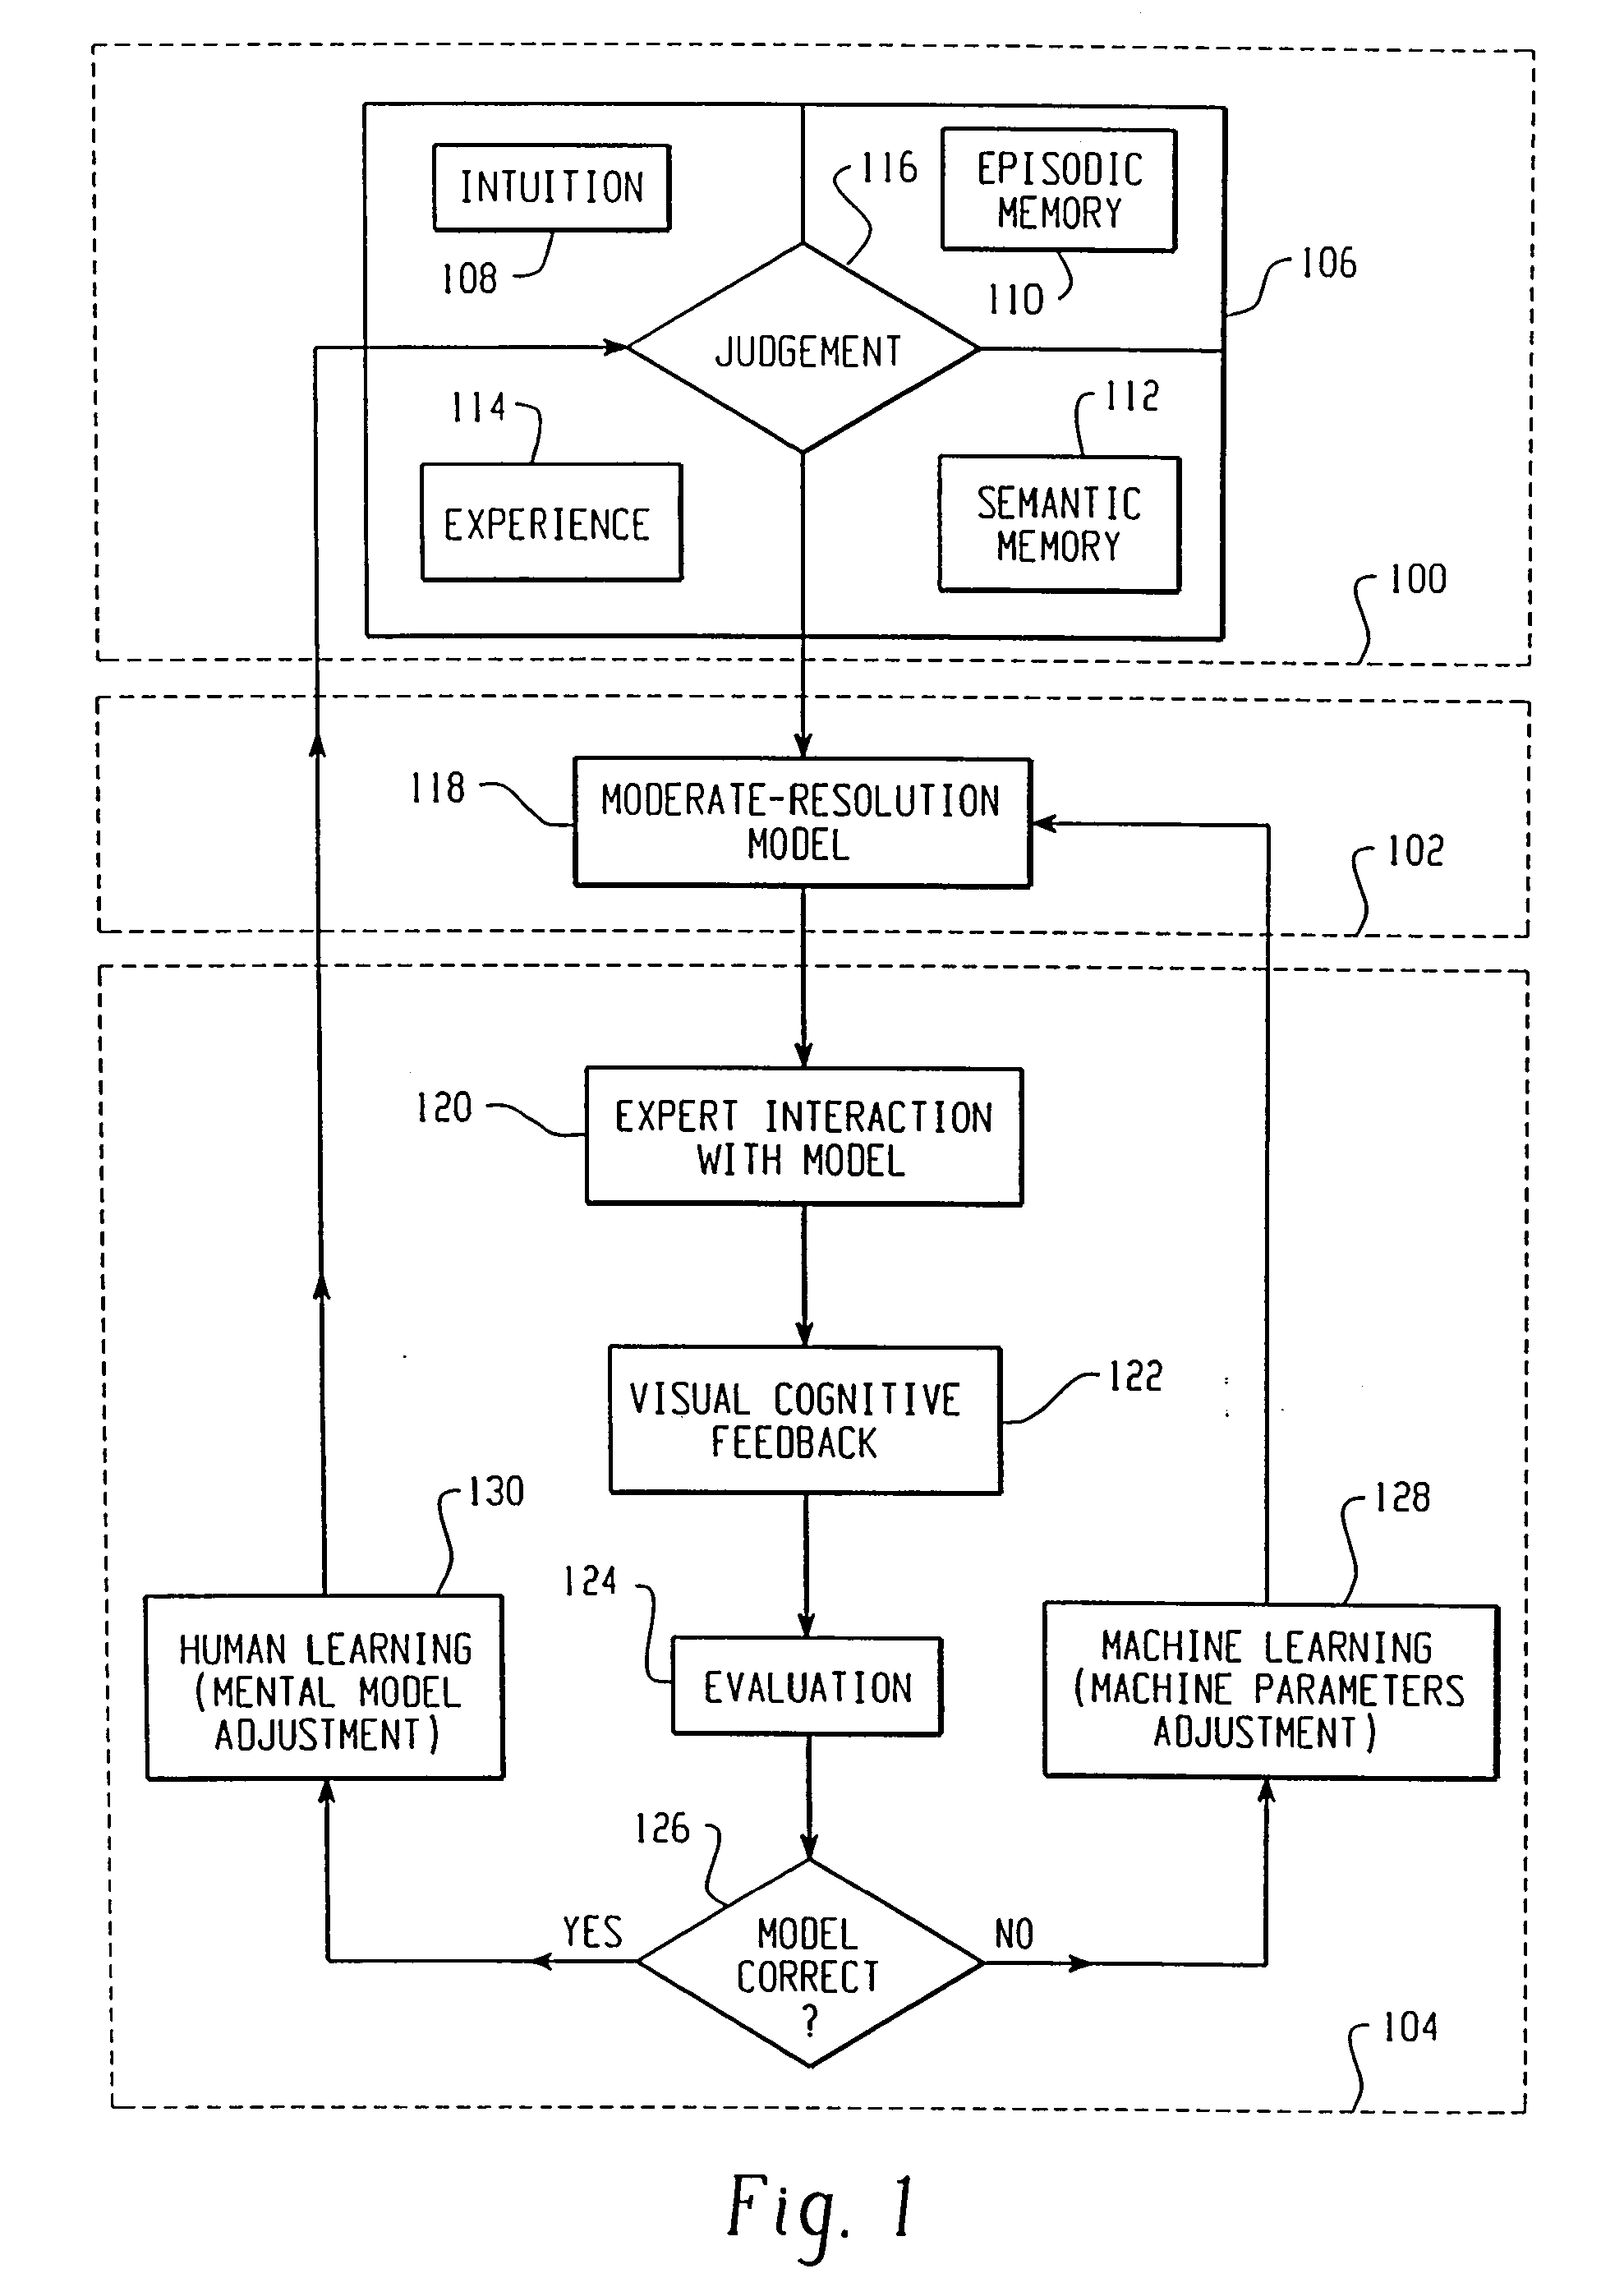 Adaptive dynamic personal modeling system and method